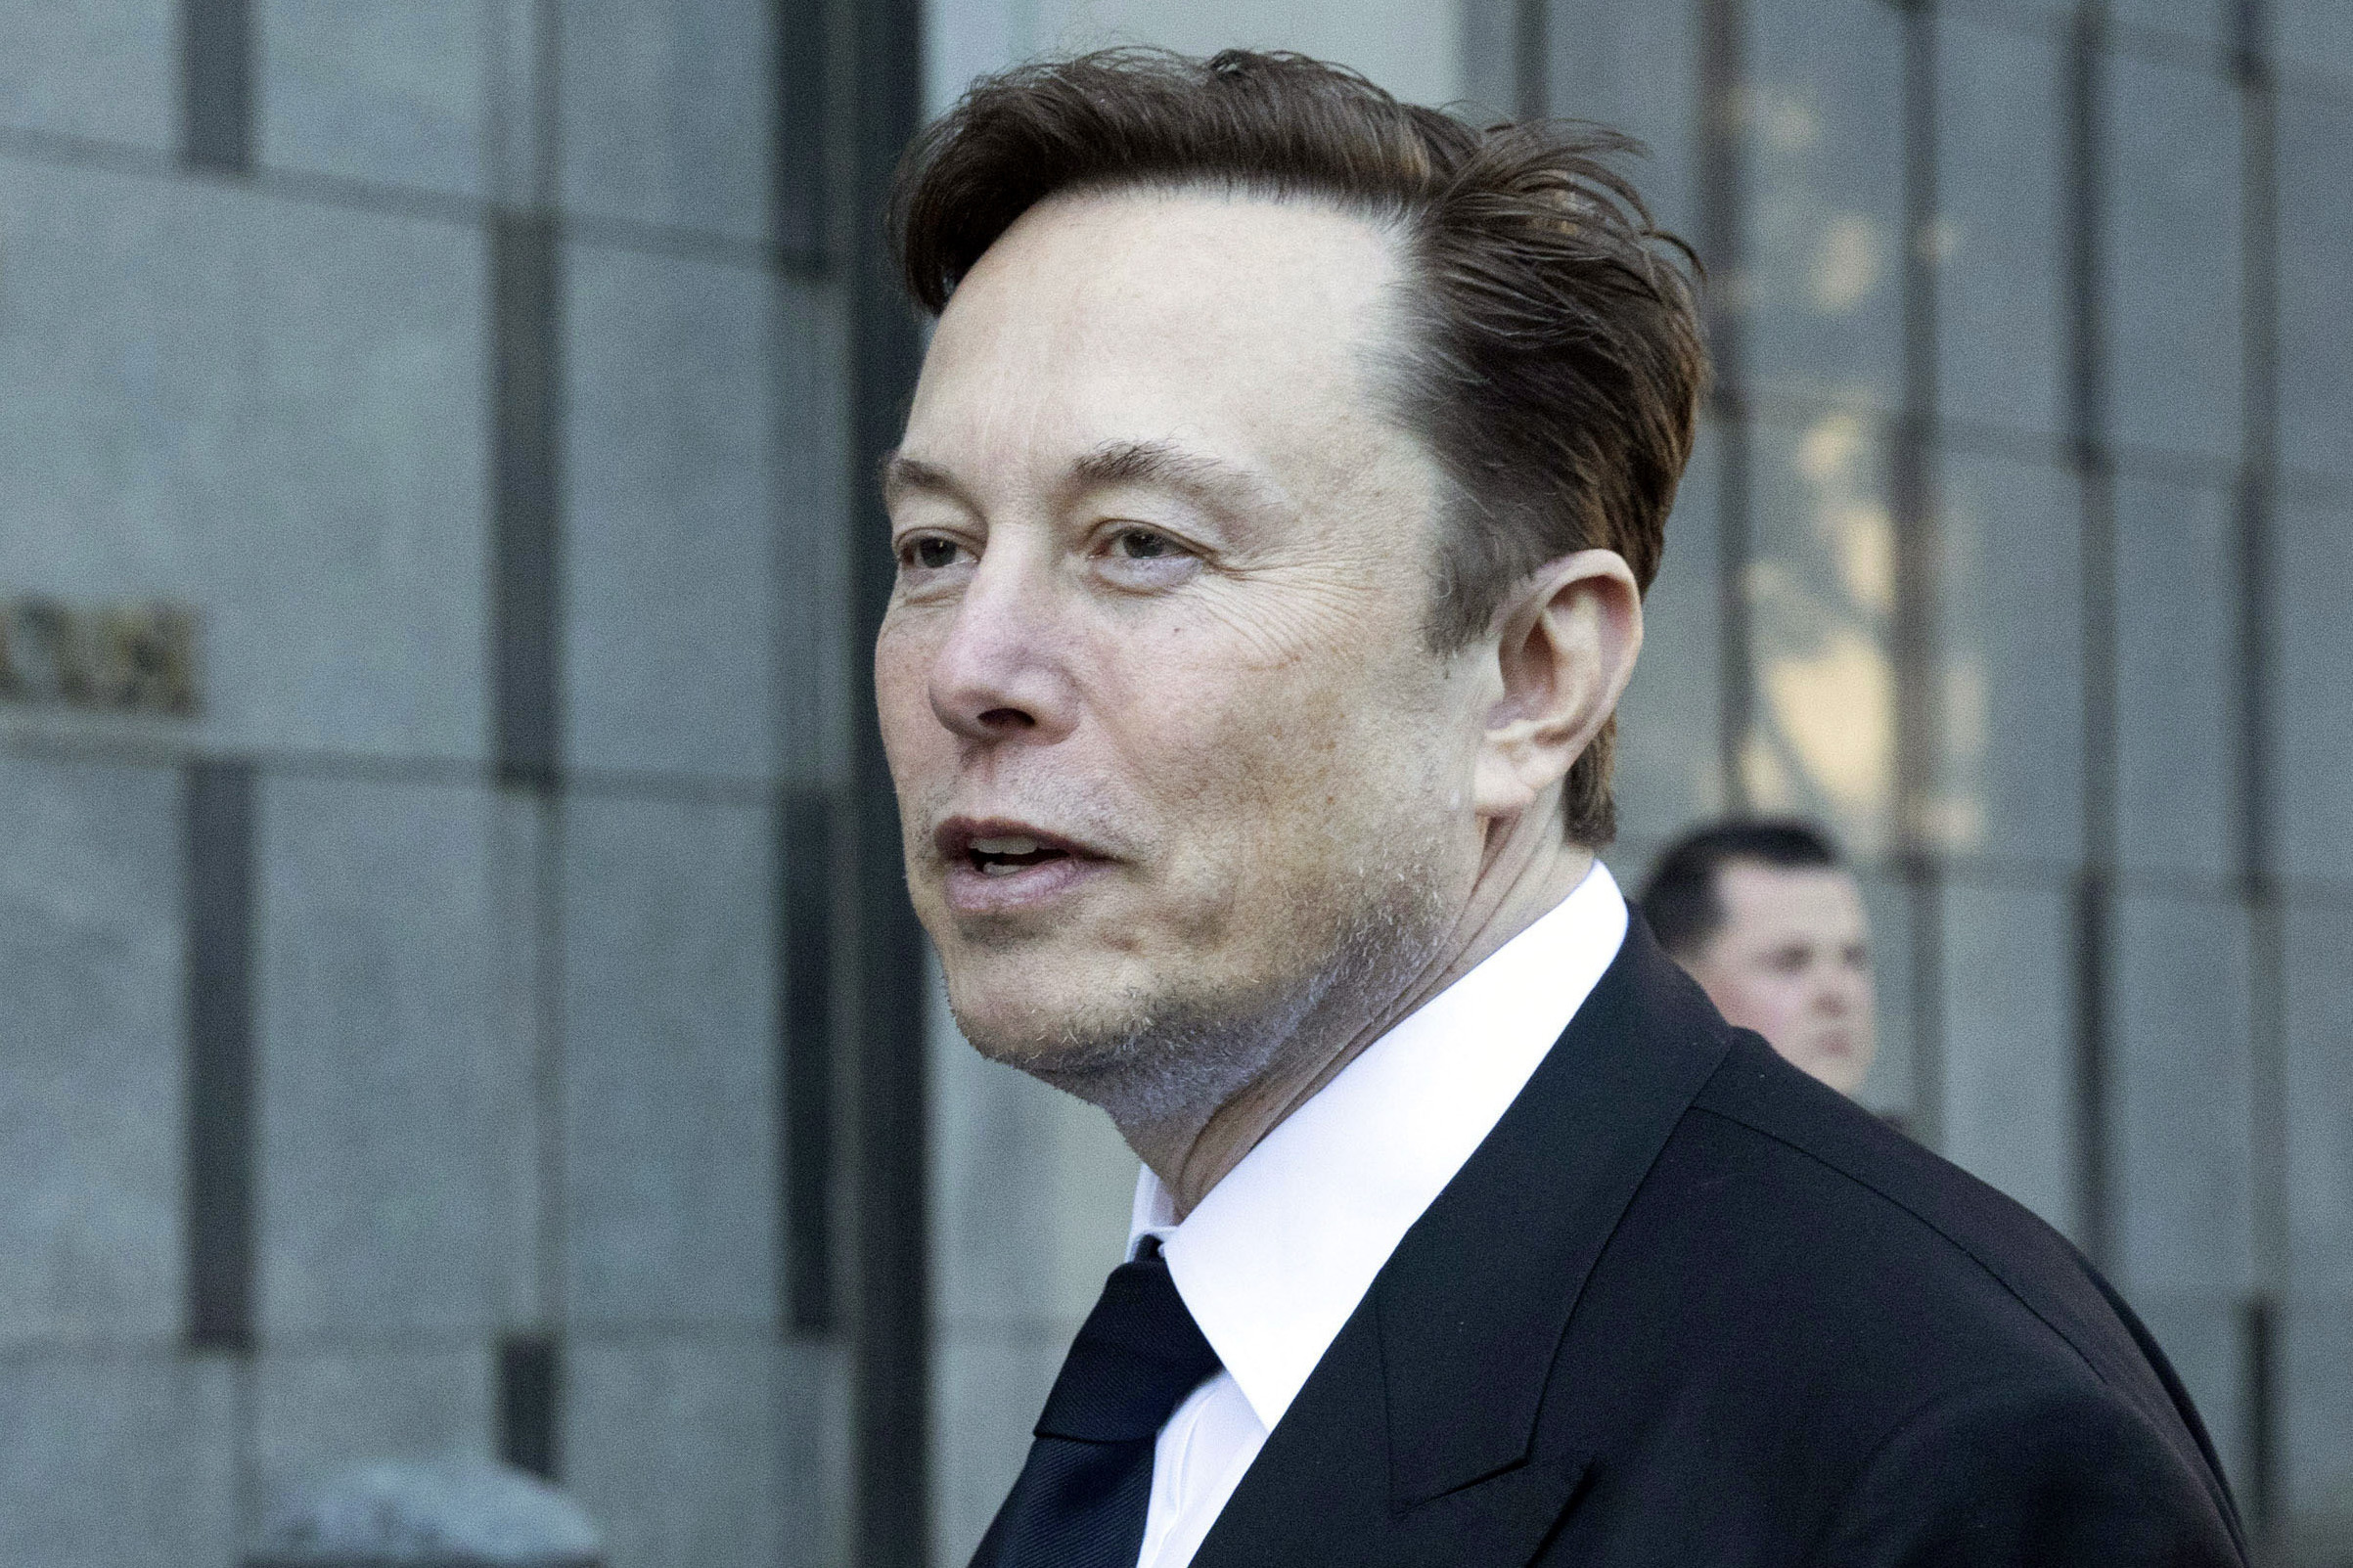 Forbes: Elon Musk no longer the world's richest person